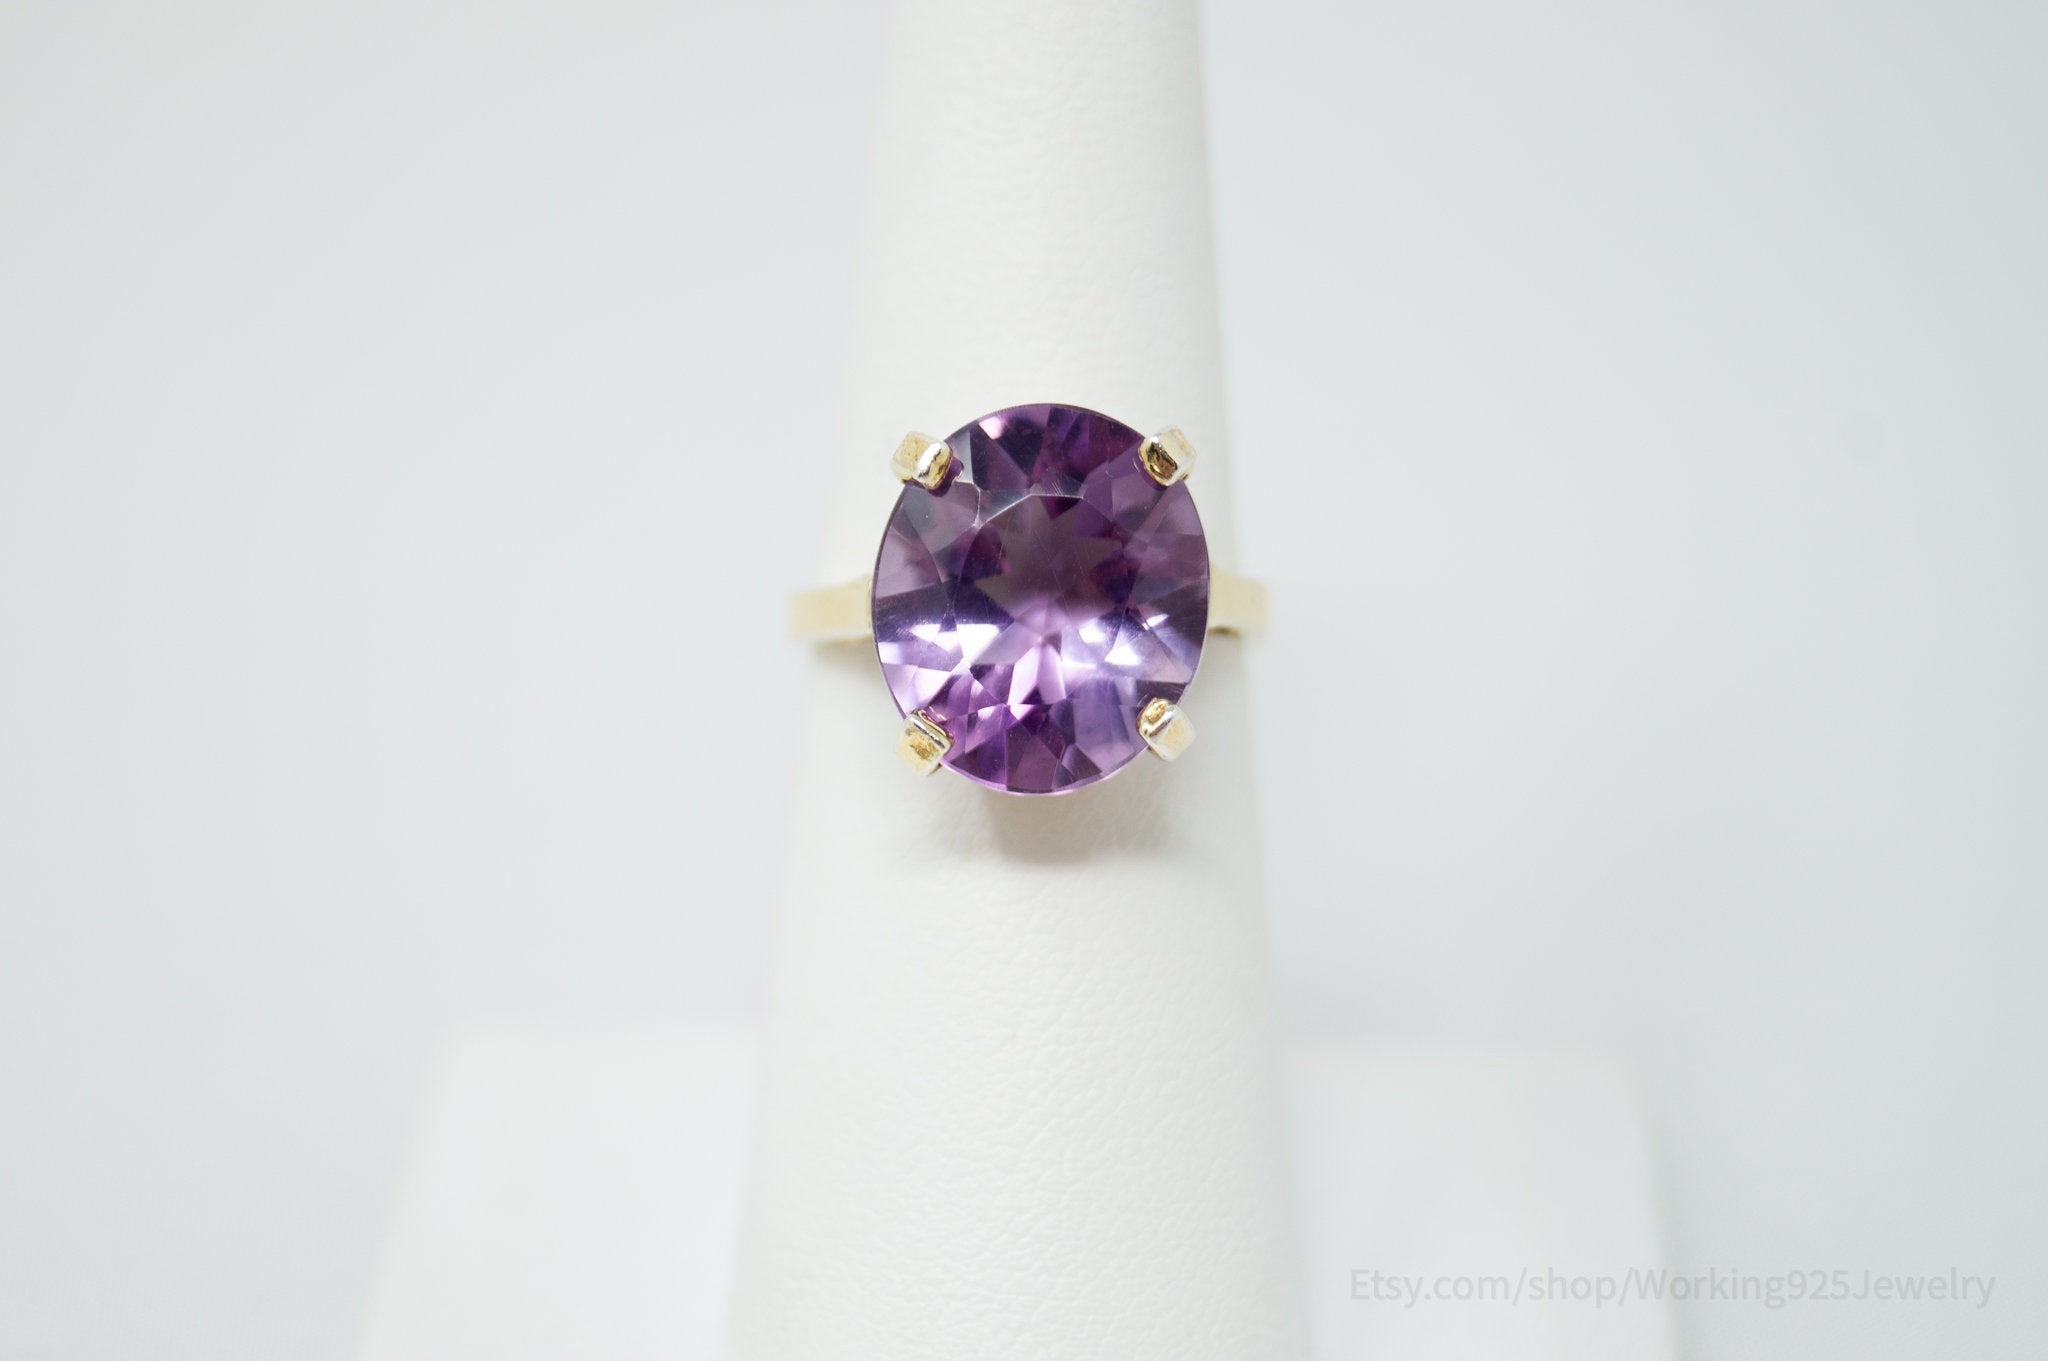 Vtg Art Deco Mid Century Style Amethyst Gold Wash Ring Sterling Silver - Size 6